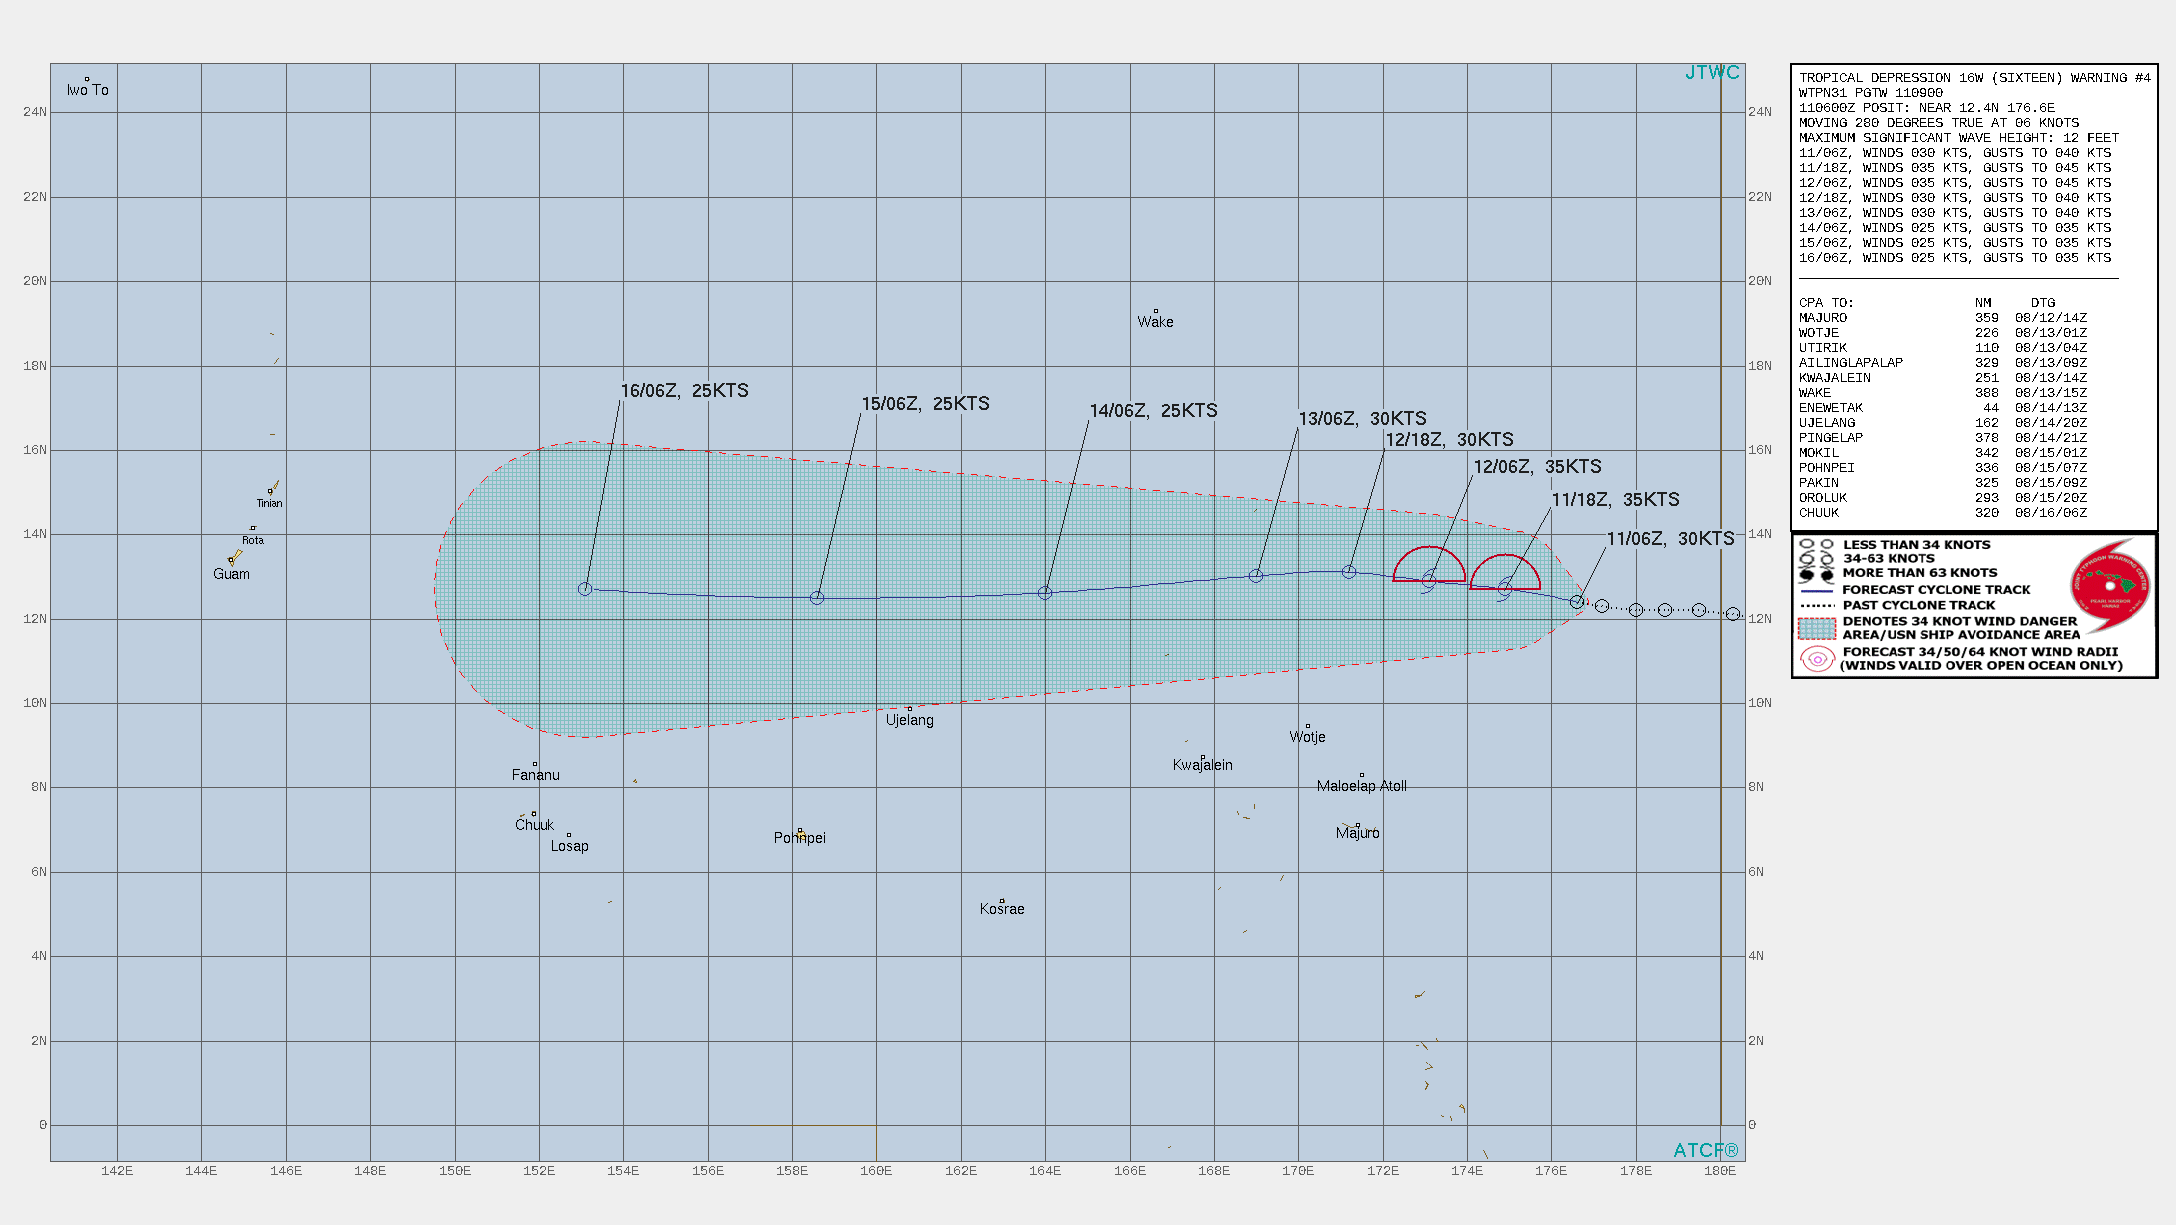 TD 04W. WARNING 4 ISSUED AT 11/09UTC.THERE ARE NO SIGNIFICANT CHANGES TO THE FORECAST FROM THE PREVIOUS WARNING.  FORECAST DISCUSSION: TROPICAL DEPRESSION 16W (SIXTEEN) IS FORECAST TO CONTINUE TRACKING GENERALLY WESTWARD ALONG THE SOUTHERN PERIPHERY OF THE SUBTROPICAL RIDGE THROUGH THE ENTIRETY OF THE FORECAST. CIMSS MOTION VECTOR ANALYSIS AND JTWC HAND ANALYSIS INDICATE THE PRESENCE OF AN UPPER-LEVEL POINT SOURCE JUST EAST OF THE LOW LEVEL CIRCULATION CENTER(LLCC), WHICH SUPPORTS THE FLARING CONVECTION TO THE EAST OF THE CENTER. THE CIMSS ANALYSIS ALSO REVEALS ONLY LOW VERTICAL WIND SHEAR(VWS) OVER THE SYSTEM, BUT MODEL-DERIVED CROSS-SECTIONS SHOW THE PRESENCE OF MORE MODERATE LEVELS OF SHEAR AND THE PRESENCE OF RELATIVELY DRY AIR IN THE 600-400 MB LAYER, WHICH IS BORNE OUT BY THE OVERALL PRESENTATION OF THE SYSTEM AT 0600UTC. OUTFLOW REMAINS RELATIVELY GOOD TO POLEWARD ALONG THE EASTERN SIDE OF A TUTT CENTERED ABOUT 1480 KM TO THE NORTHWEST. SHEAR IS EXPECTED TO RELAX A BIT OVER THE NEXT 12 TO 24 HOURS, WHICH SHOULD ALLOW FOR A BRIEF PERIOD OF WEAK INTENSIFICATION TO 35 KNOTS THROUGH 24H. THEREAFTER THE UPPER-LEVEL PATTERN IS FORECAST TO CHANGE, WITH NORTHEASTERLY FLOW MOVING DOWN ON TOP OF THE SYSTEM, WEAKENING THE OUTFLOW ALOFT. WHILE SHEAR WILL REMAIN RELATIVELY LOW DURING THIS TIME, THE LACK OF A STRONG OUTFLOW MECHANISM WILL LEAD TO STEADY WEAKENING THROUGH 72H. THE CONTINUING WEAK EQUATORWARD OUTFLOW WILL OFFSET LOW TO MODERATE VWS AND WARM SSTS, WITH TD 16W MAINTAINING WEAK TROPICAL DEPRESSION STRENGTH THROUGH 120H, THOUGH THE POSSIBILITY OF DISSIPATION AFTER TAU 96H CANNOT BE RULED OUT.